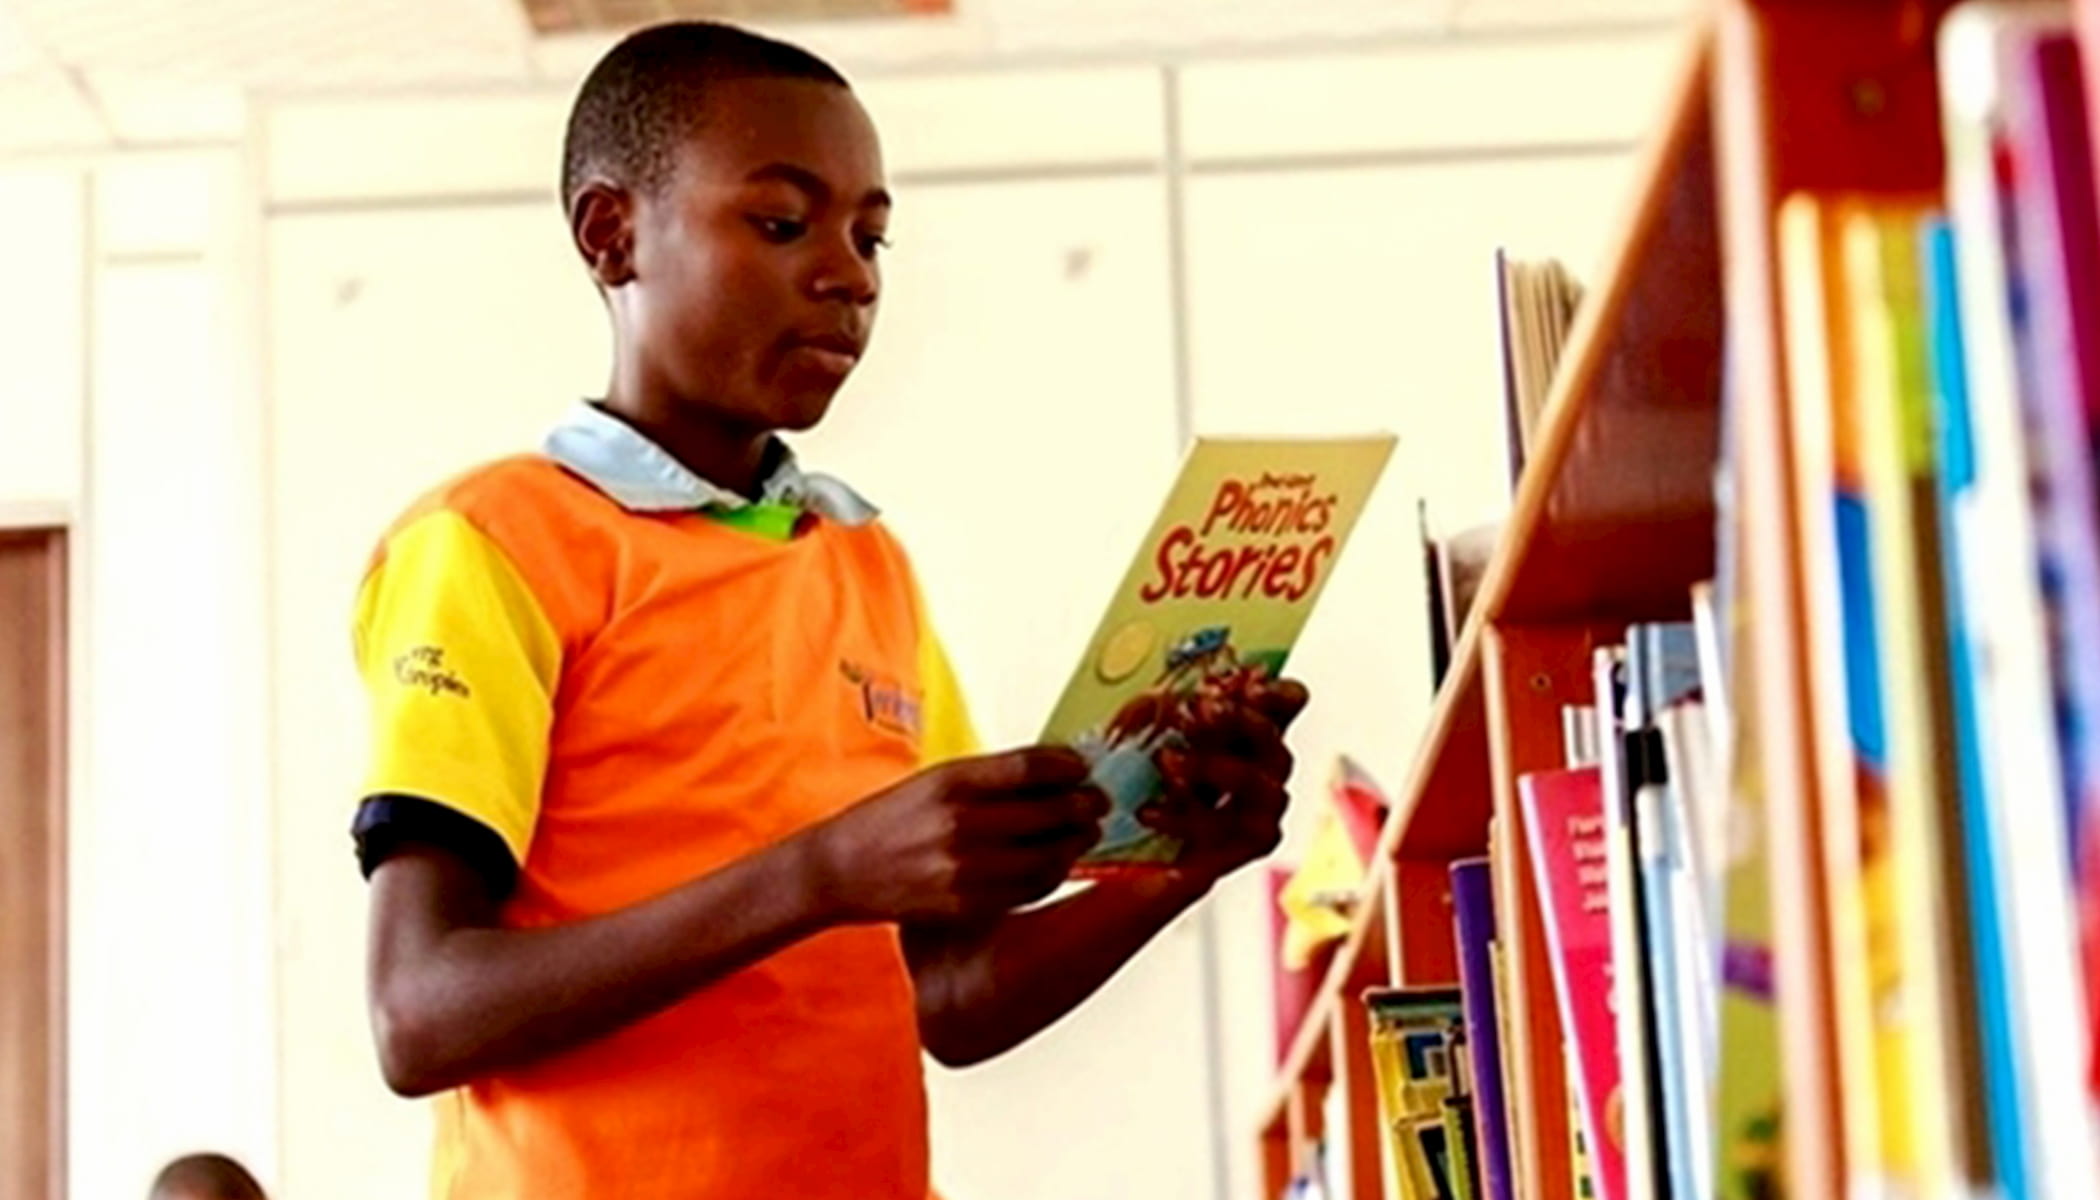 A student reading books at the launch of the Library for All mobile app in Kigali, Rwanda.